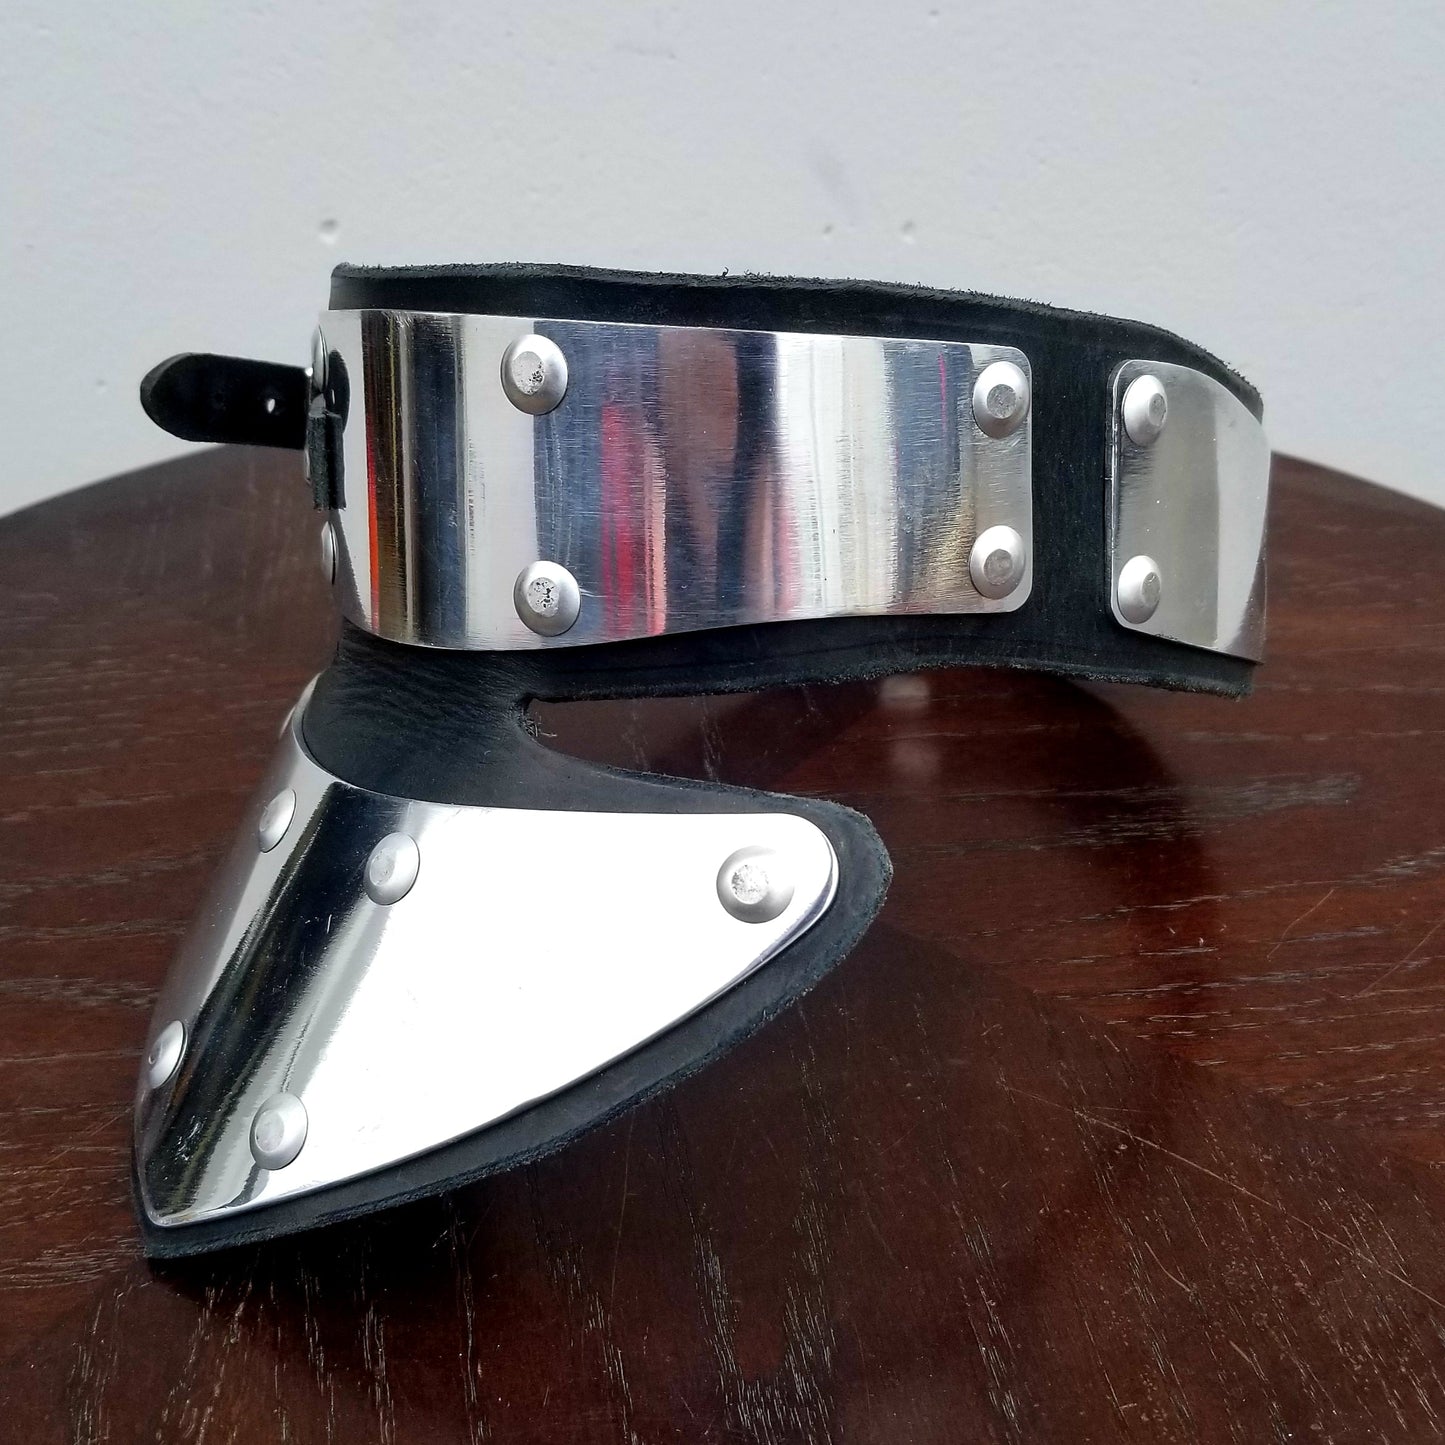 Aluminum and Leather SCA Collar Gorget - Medium/Large (adjustable) Left Side Opening